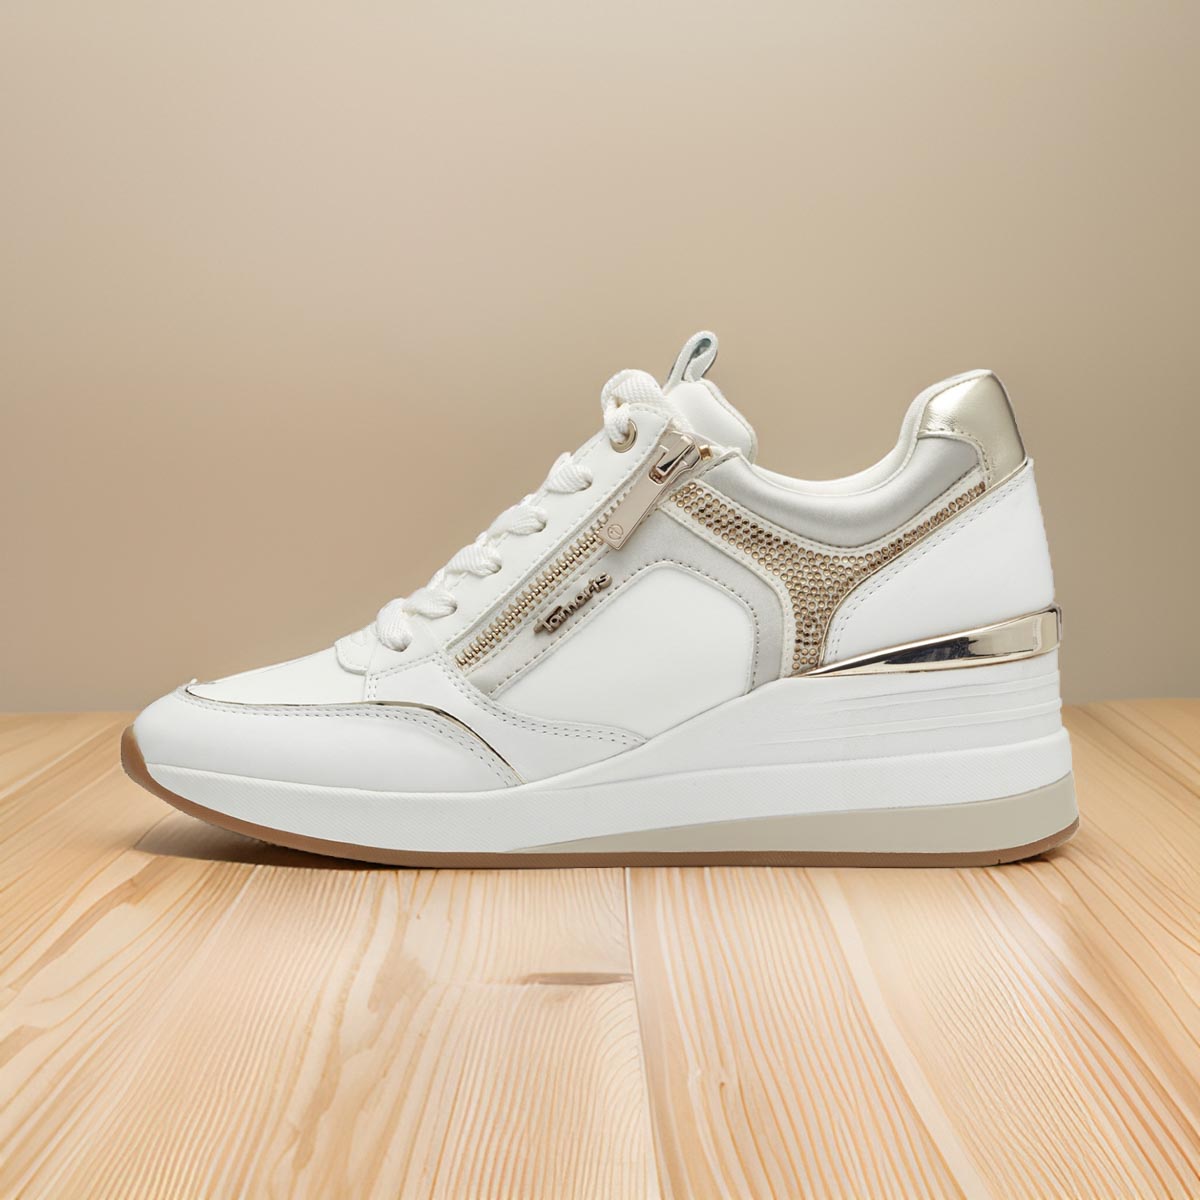 Tamaris White Women's Sneaker with Wedge Heel and Sparkle Detail